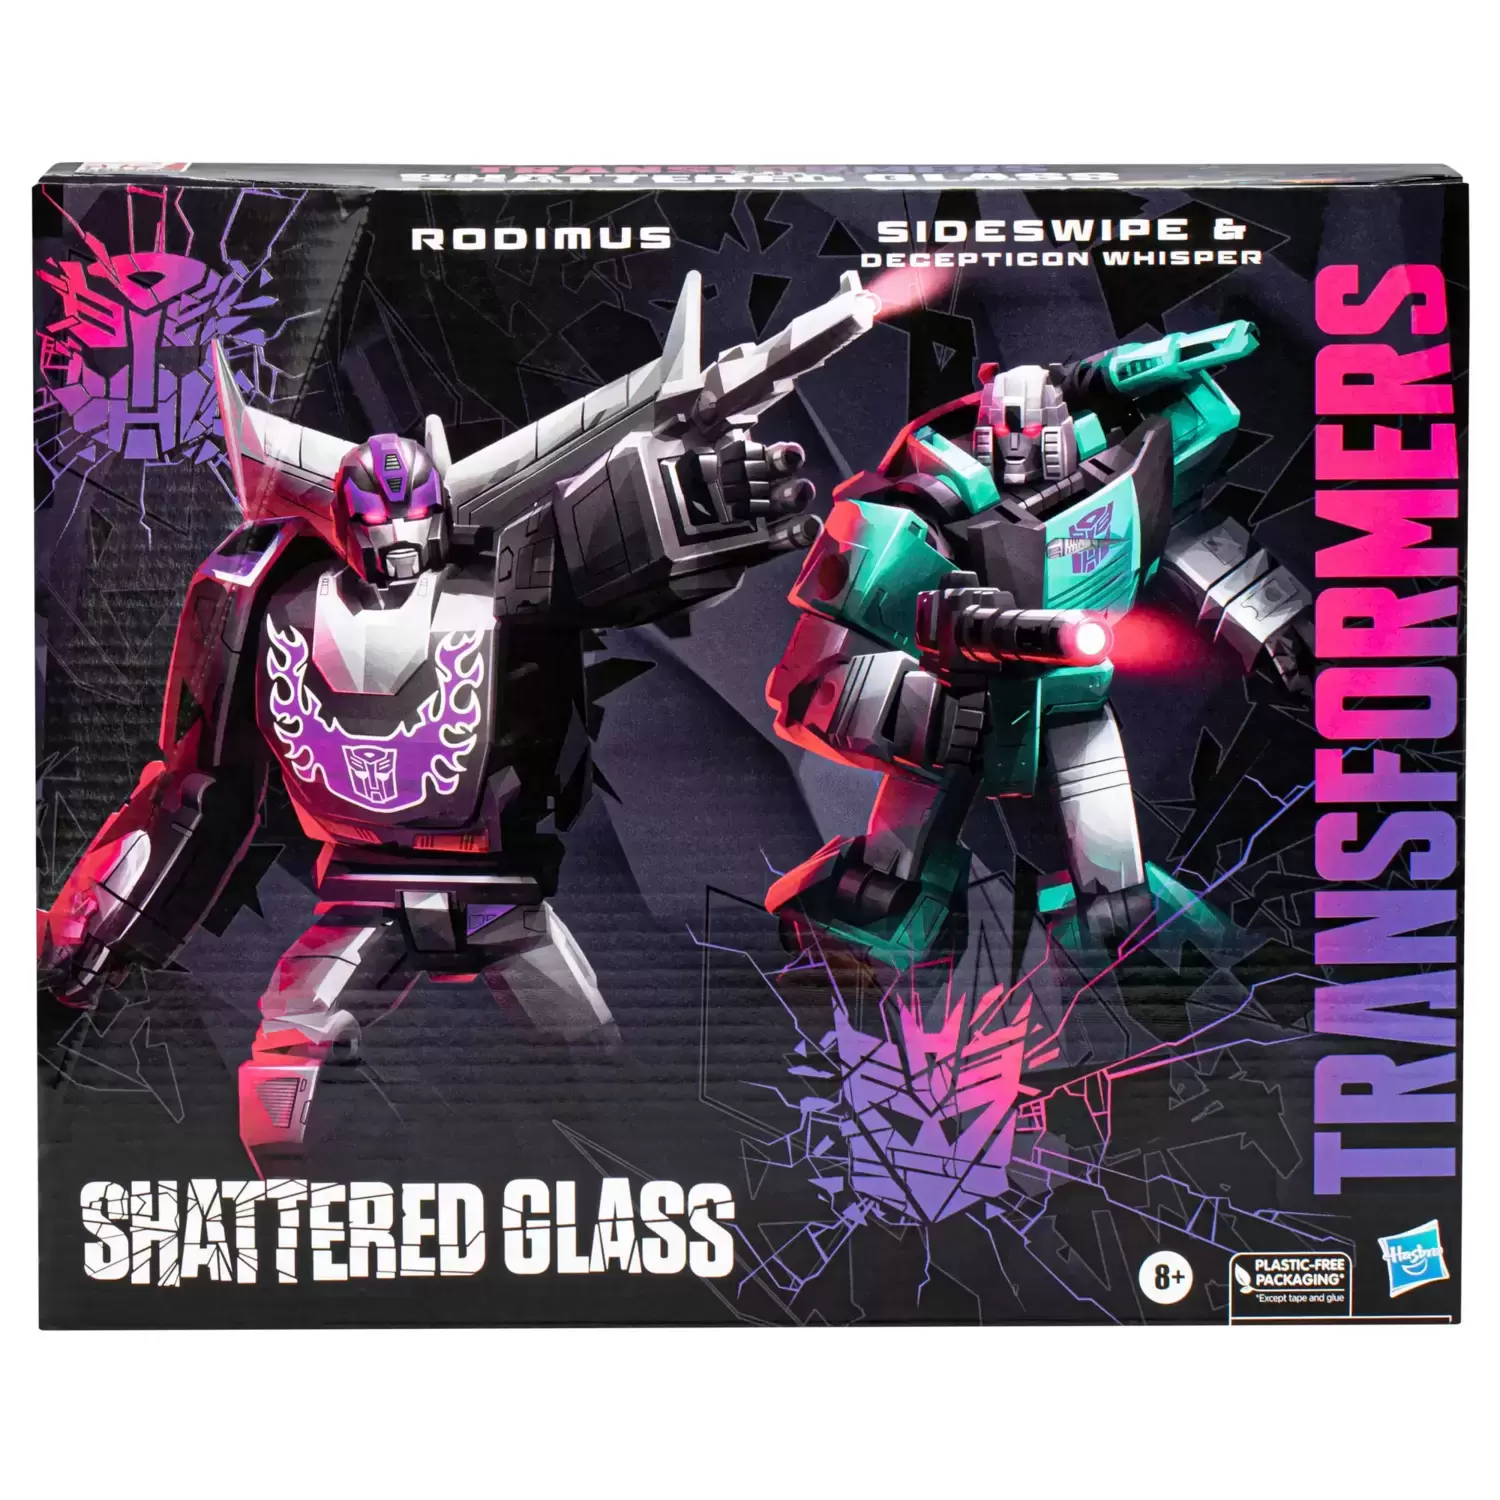 Transformers Generations: Shattered Glass Collection - Rodimus vs Sideswipe (w/ Whisper)